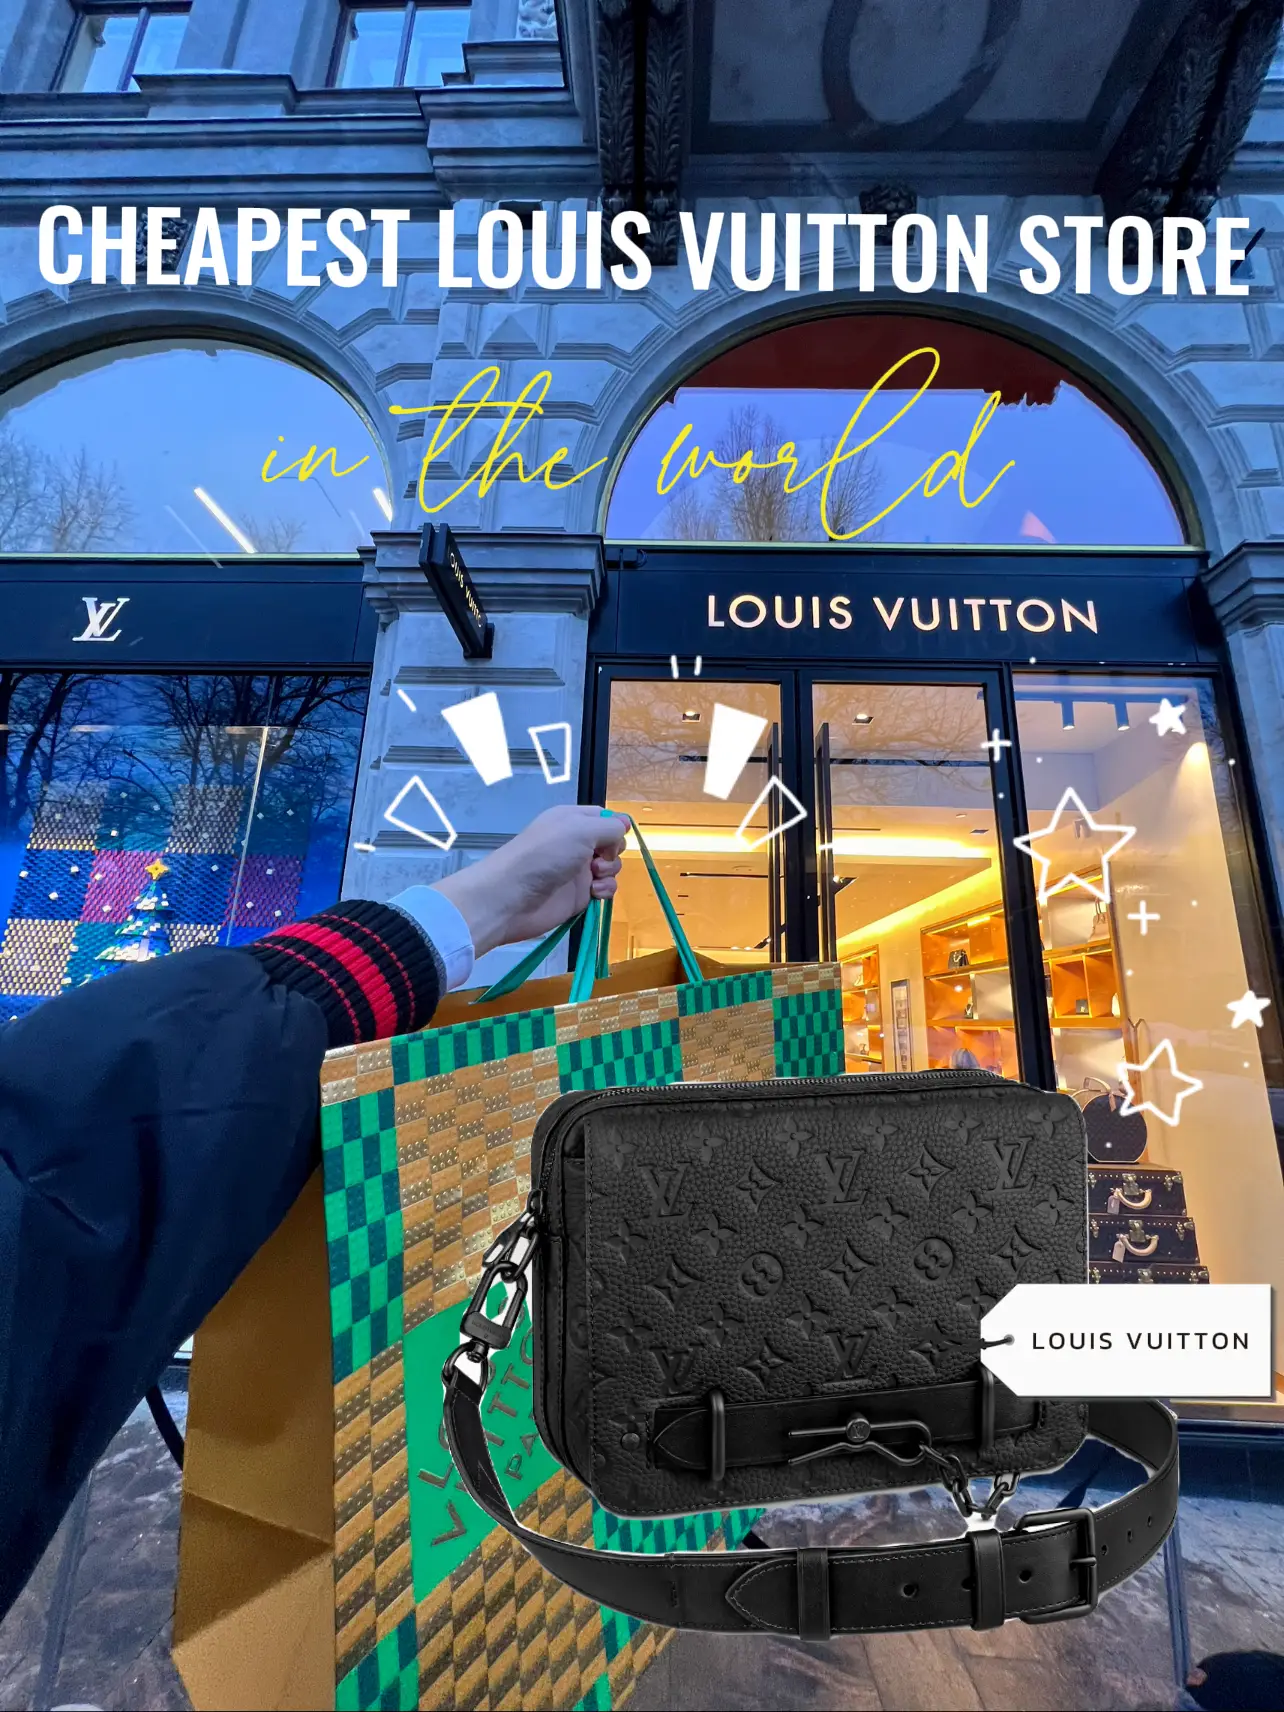 Louis Vuitton Helsinki - Leather Goods And Travel Items (Retail